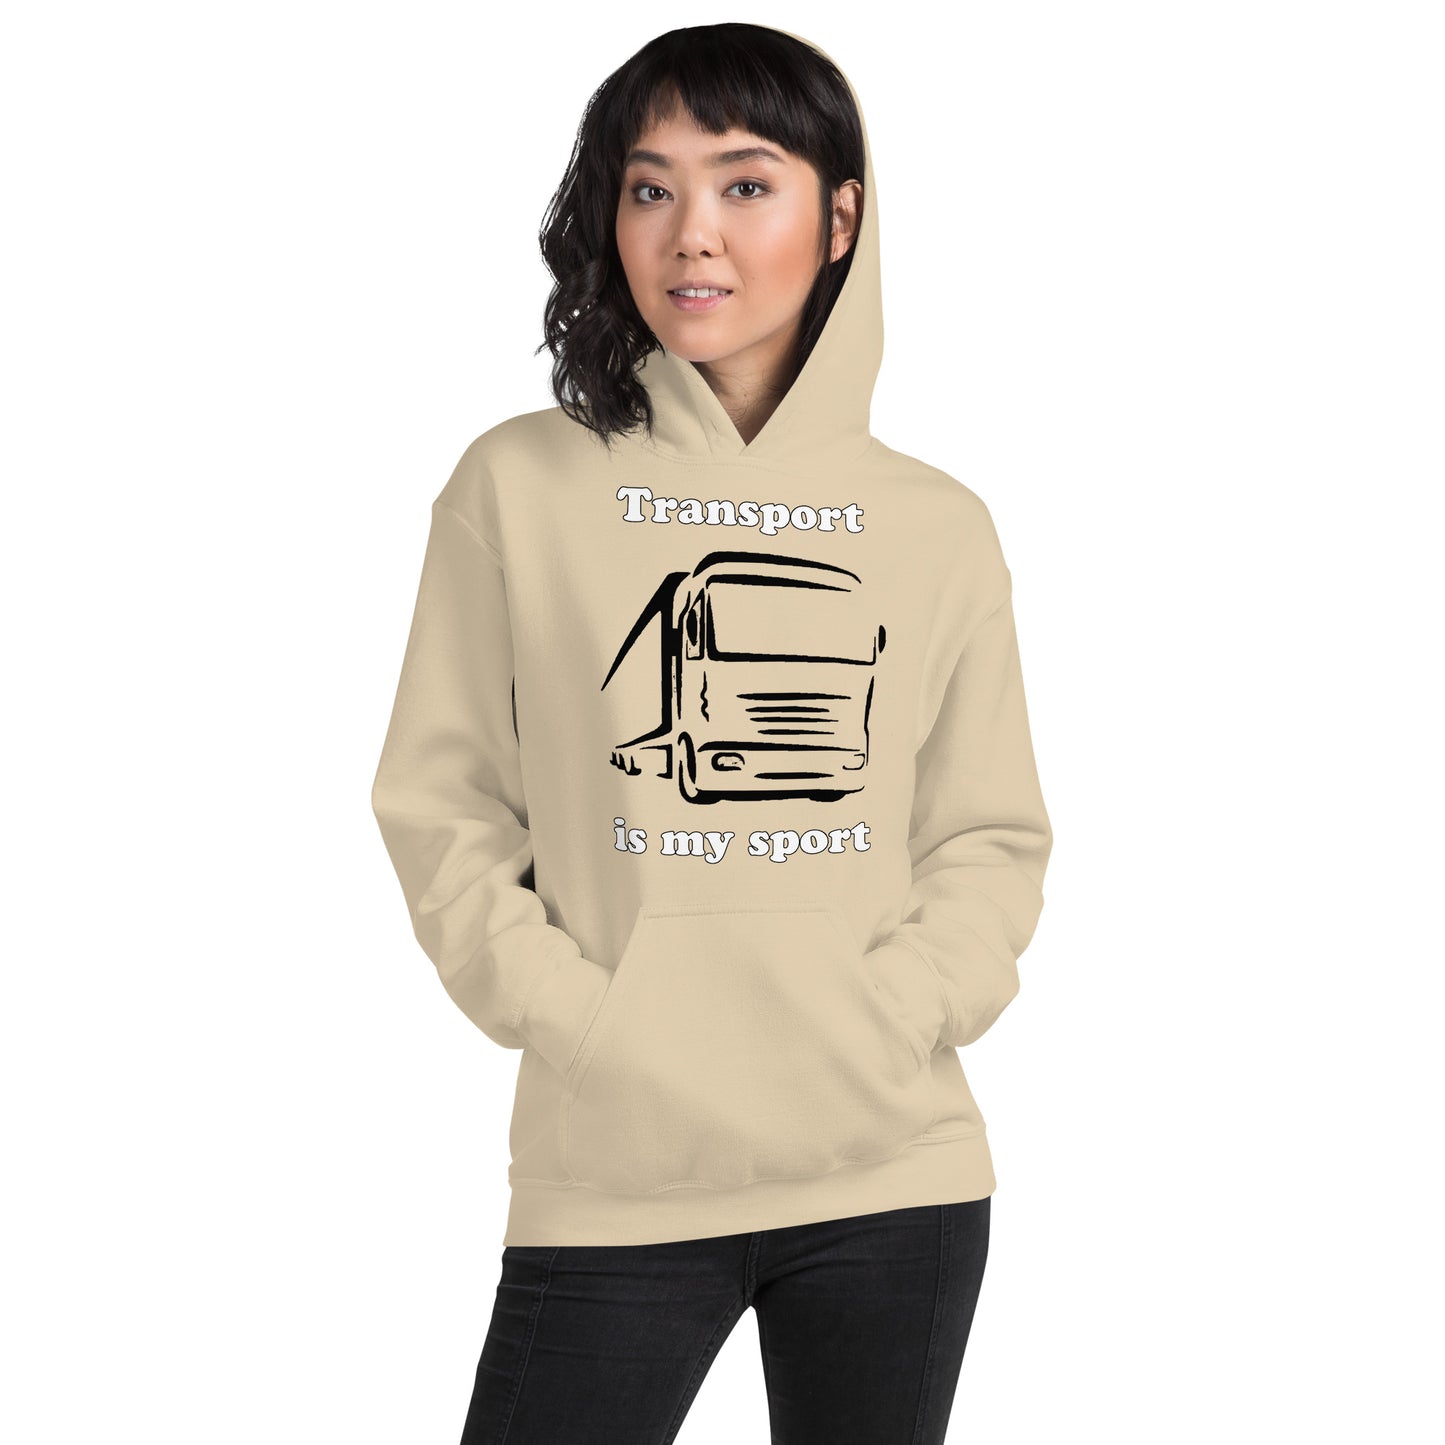 Woman with sand hoodie with picture of truck and text "Transport is my sport"